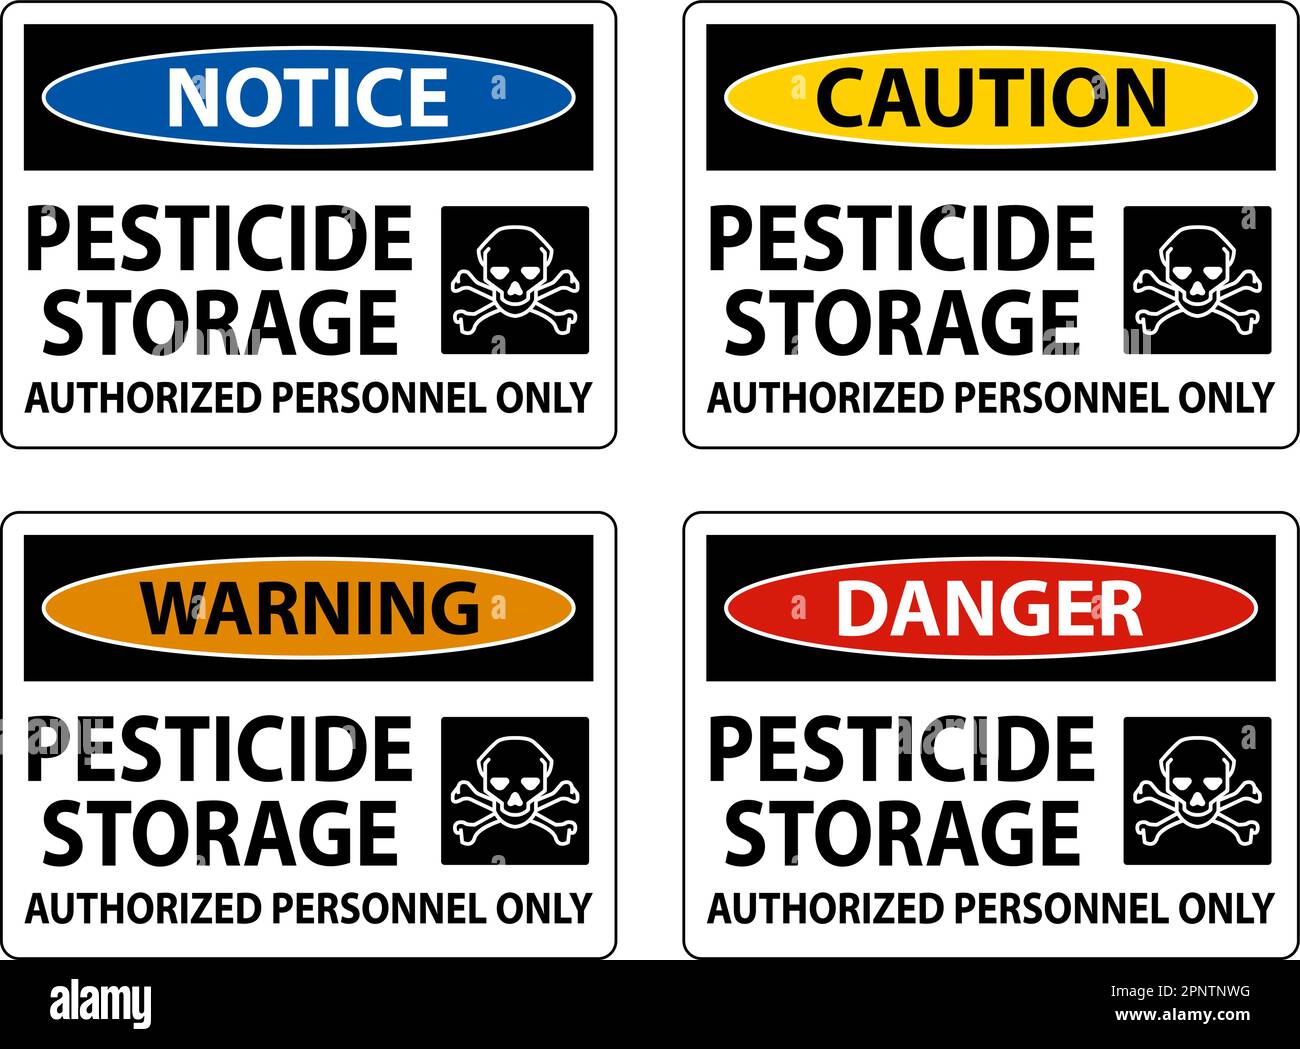 Pesticide Storage Authorized Only Sign On White Background Stock Vector